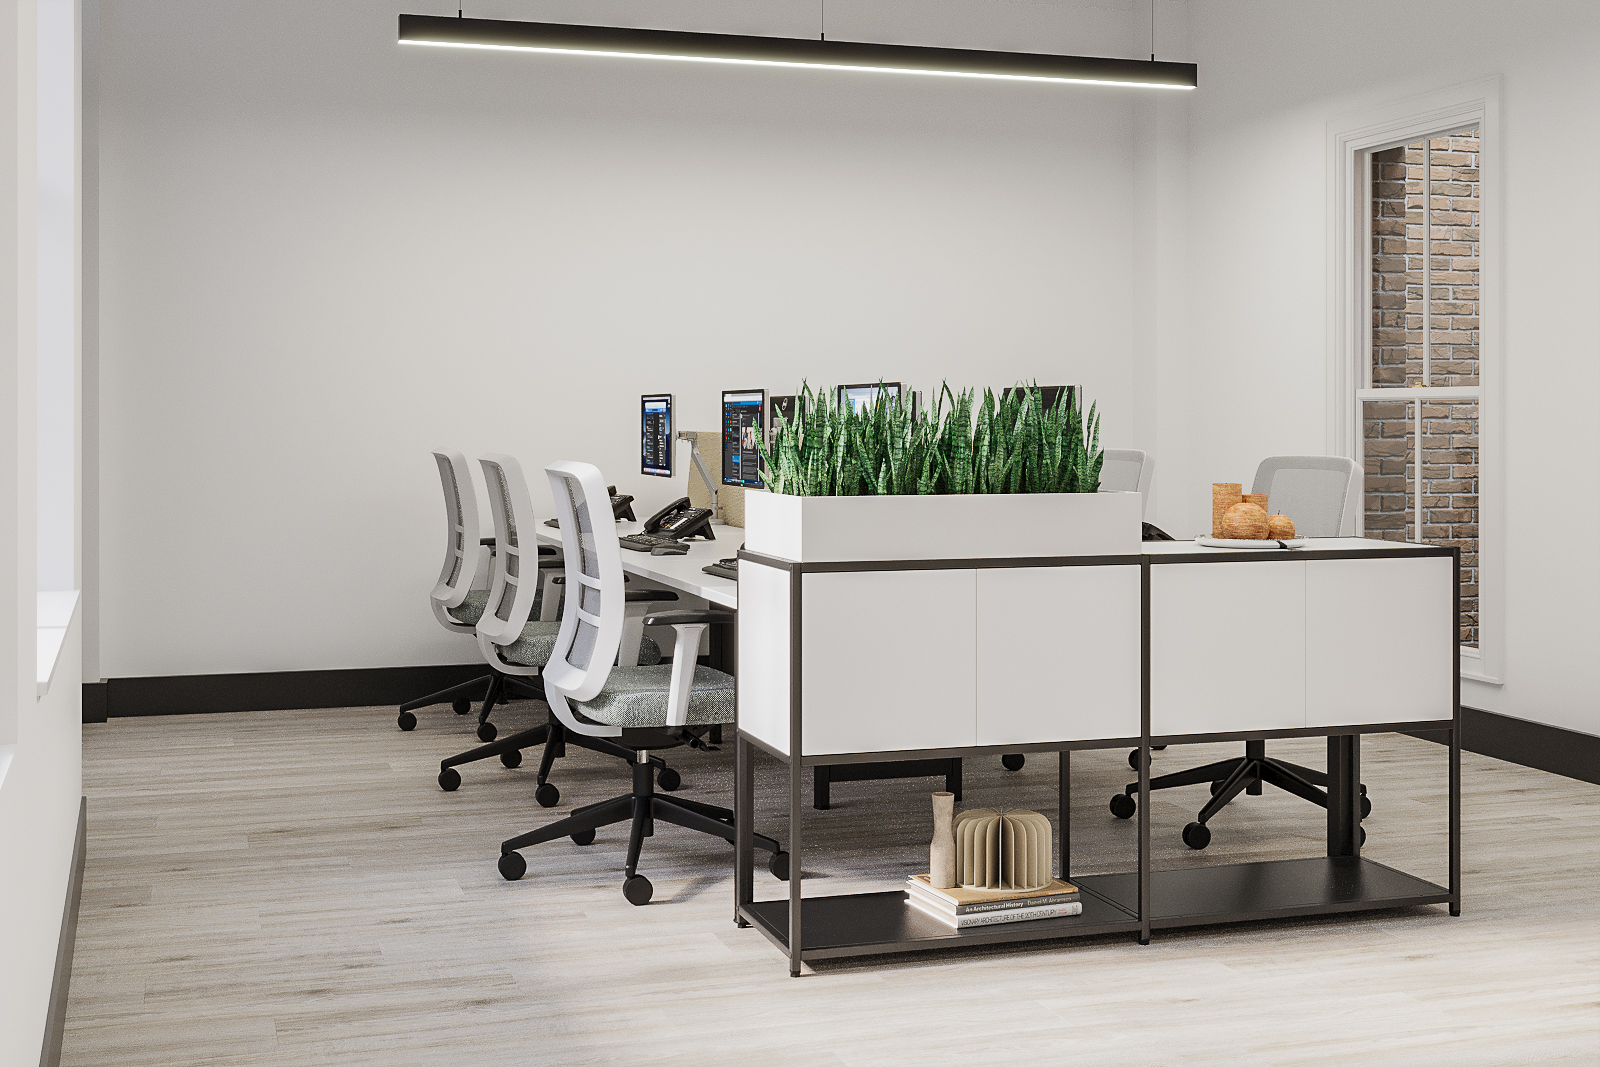 The ABCs of Office Furniture Buying